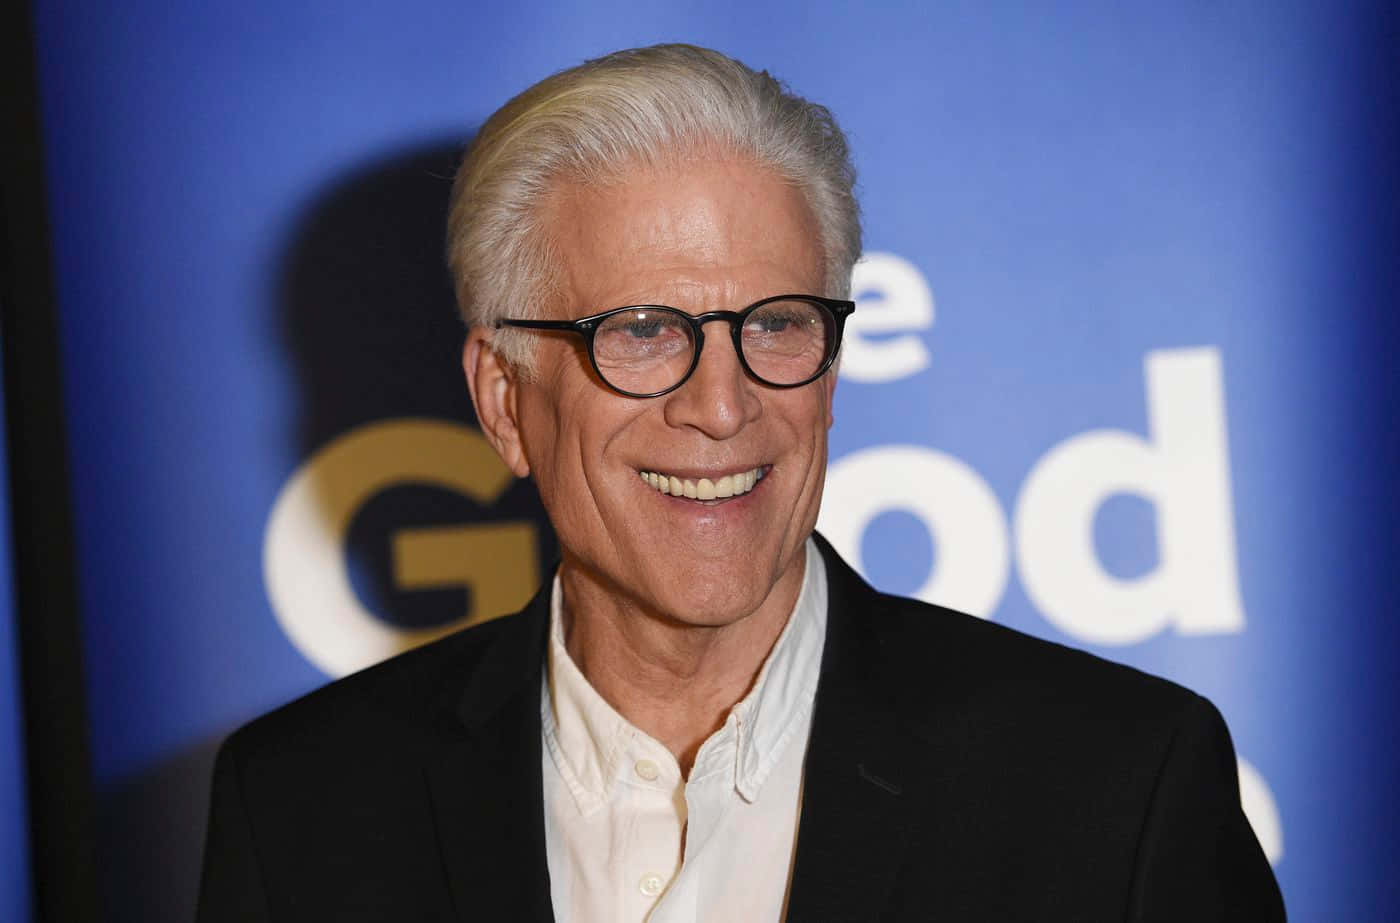 Enjoying life with a smile" - Ted Danson Wallpaper